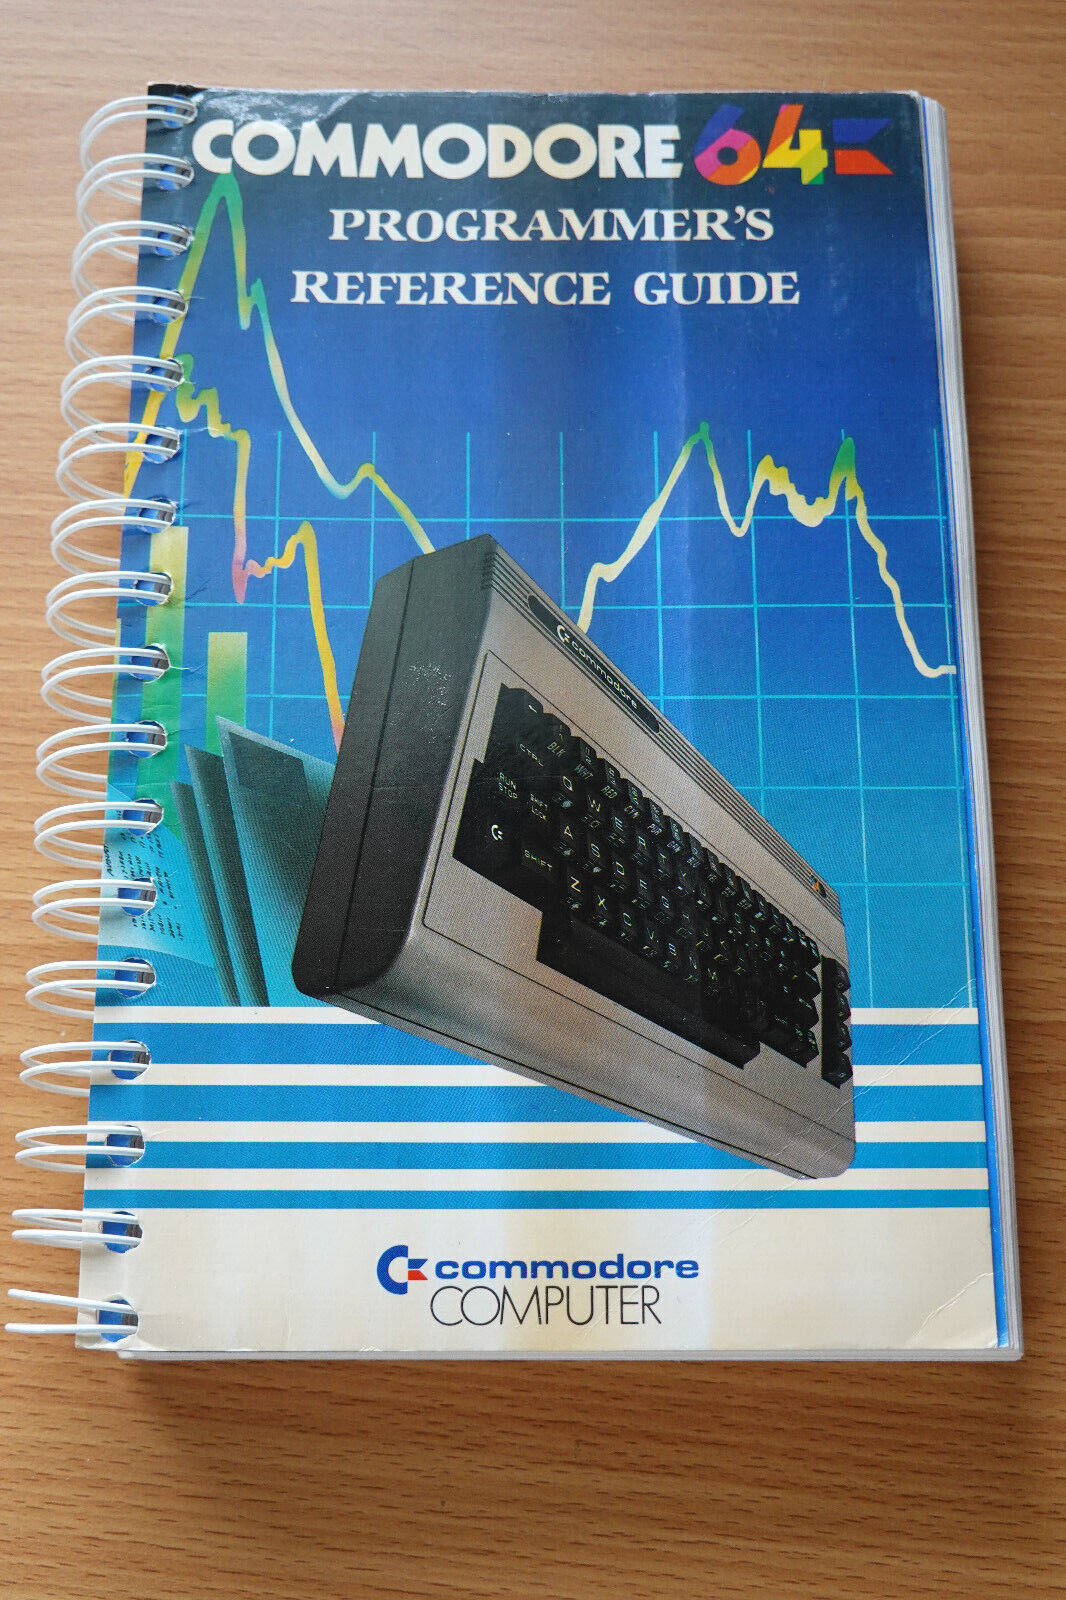 Commodore 64 Programmer’s Reference Guide Vintage Computer Manual, wire bound